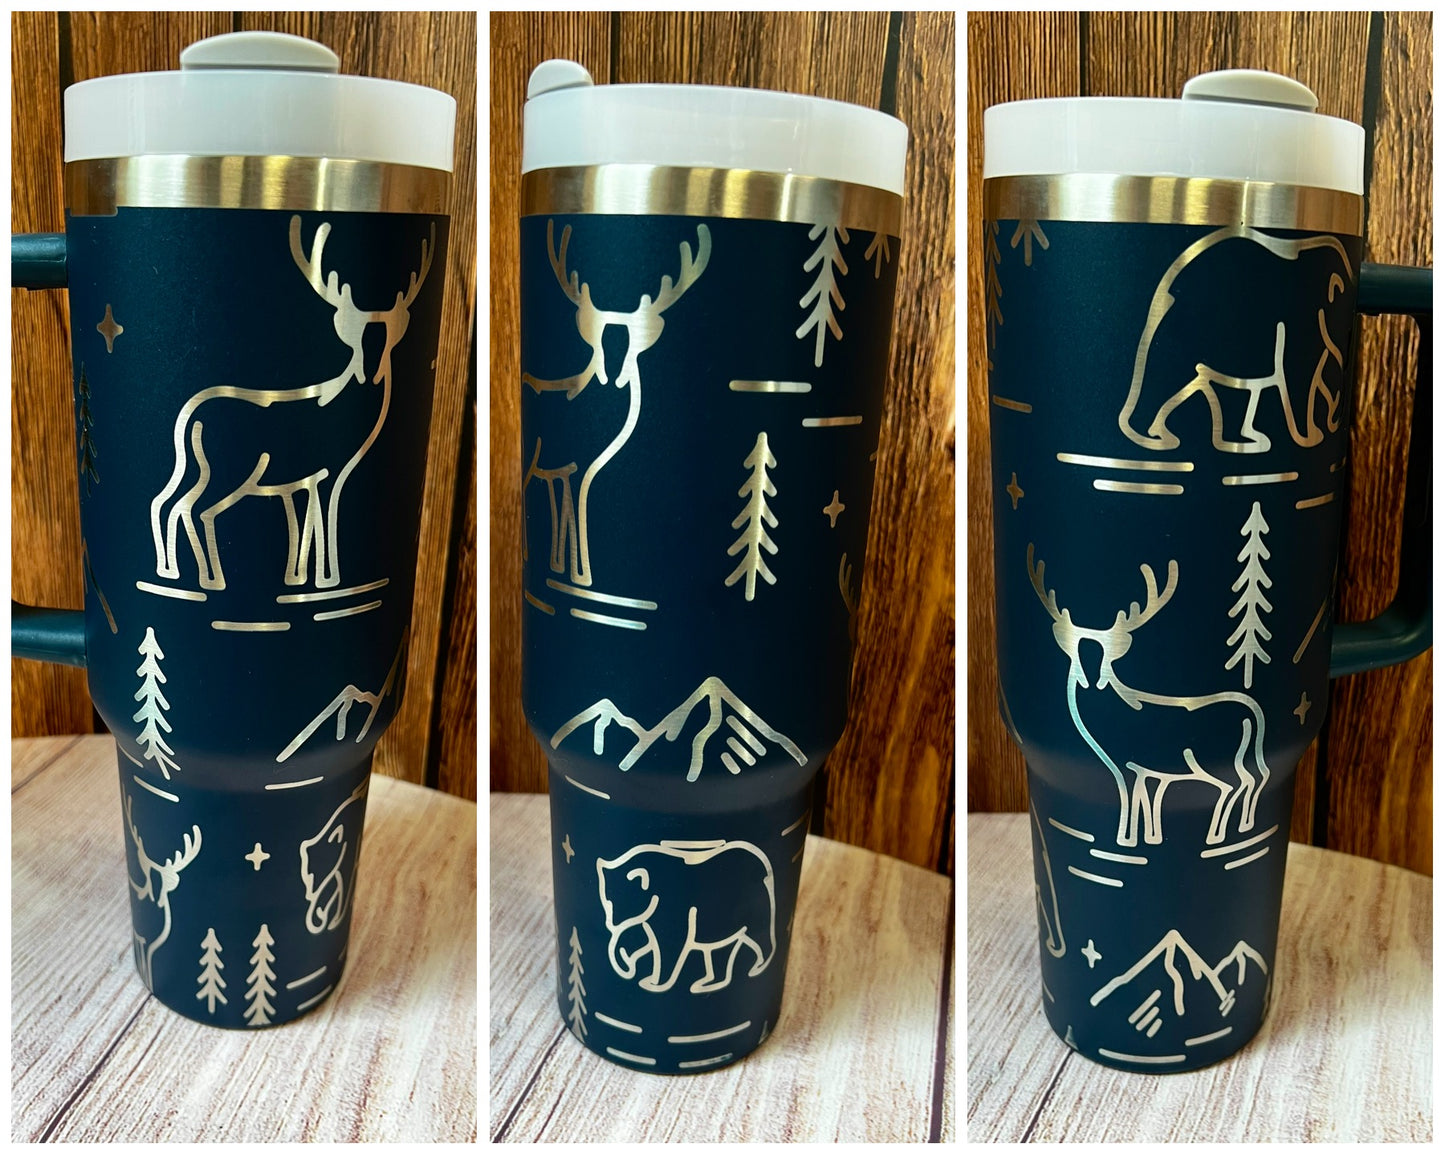 40 oz. engraved stainless steel tumbler The Great Outdoors LP